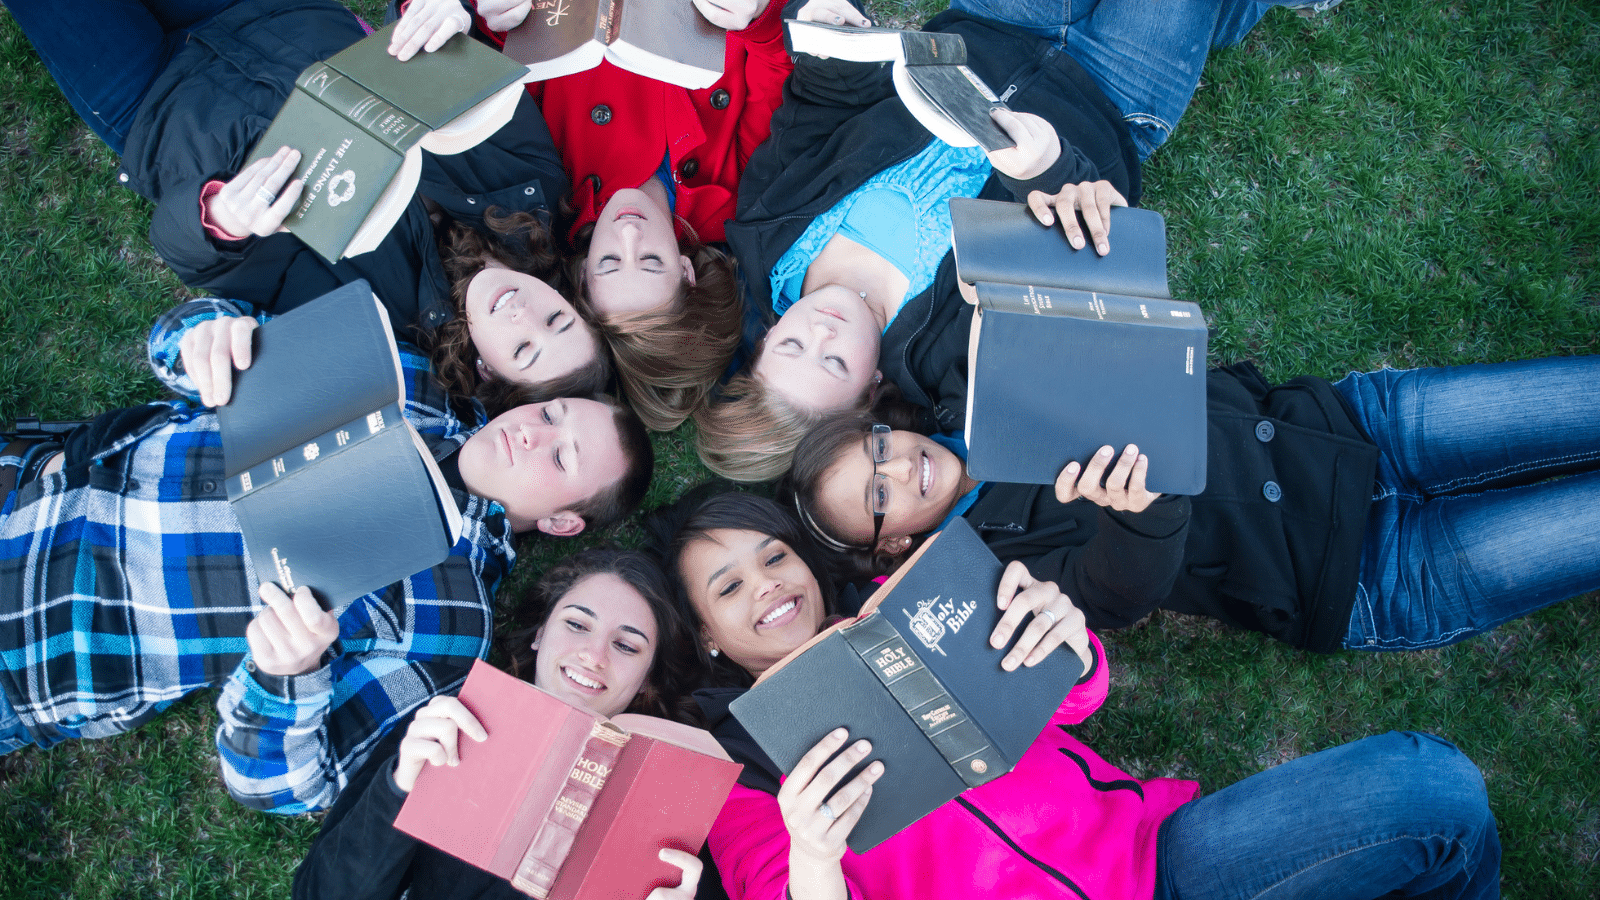 teens reading Bibles in a circle